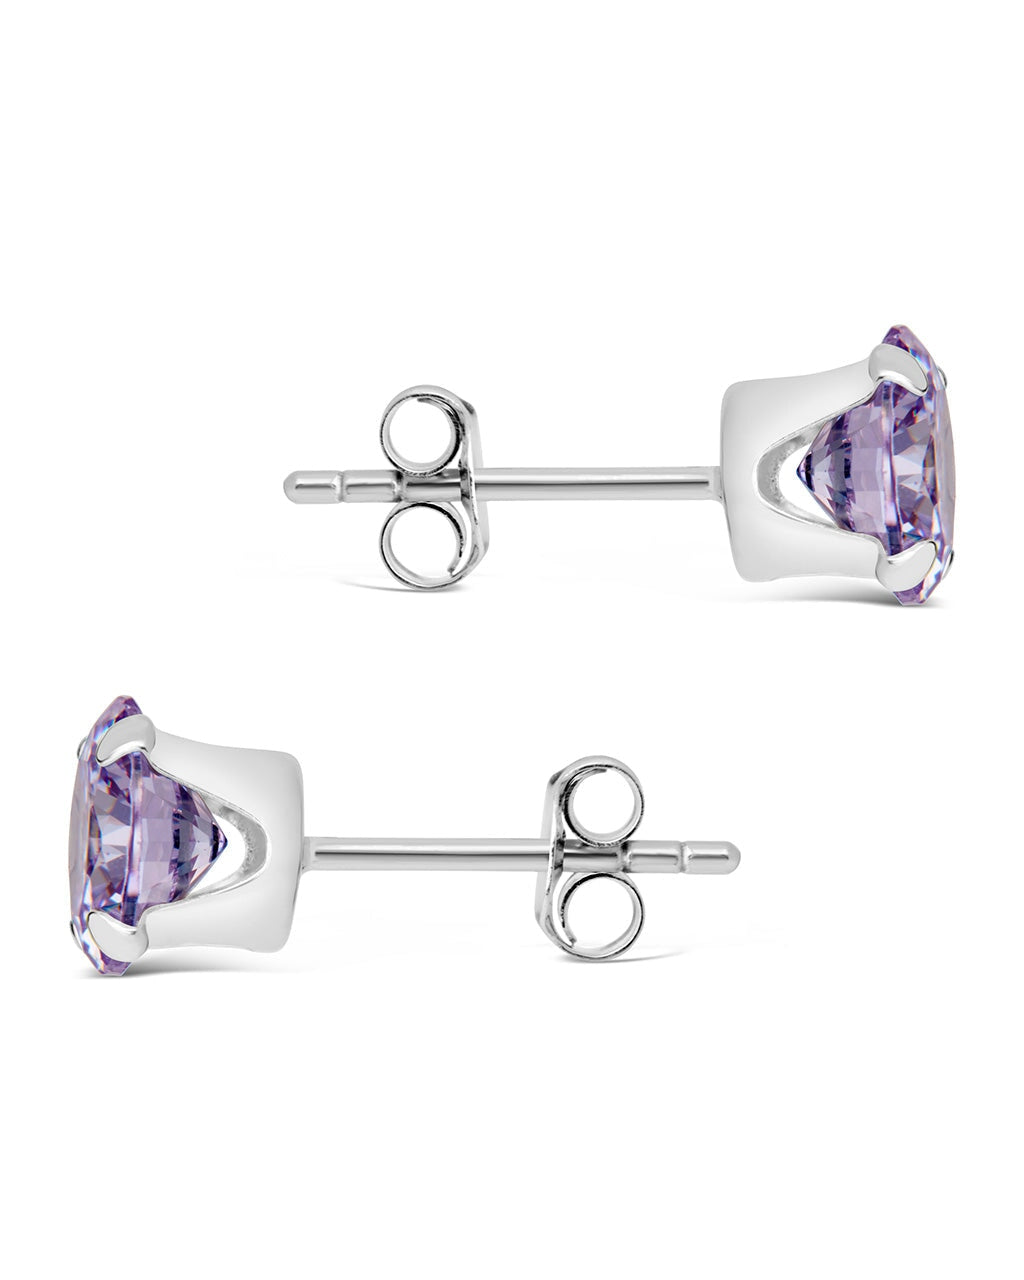 6 mm Rhodium-Plated Sterling Silver Stud Earring | In stock! | Lucleon